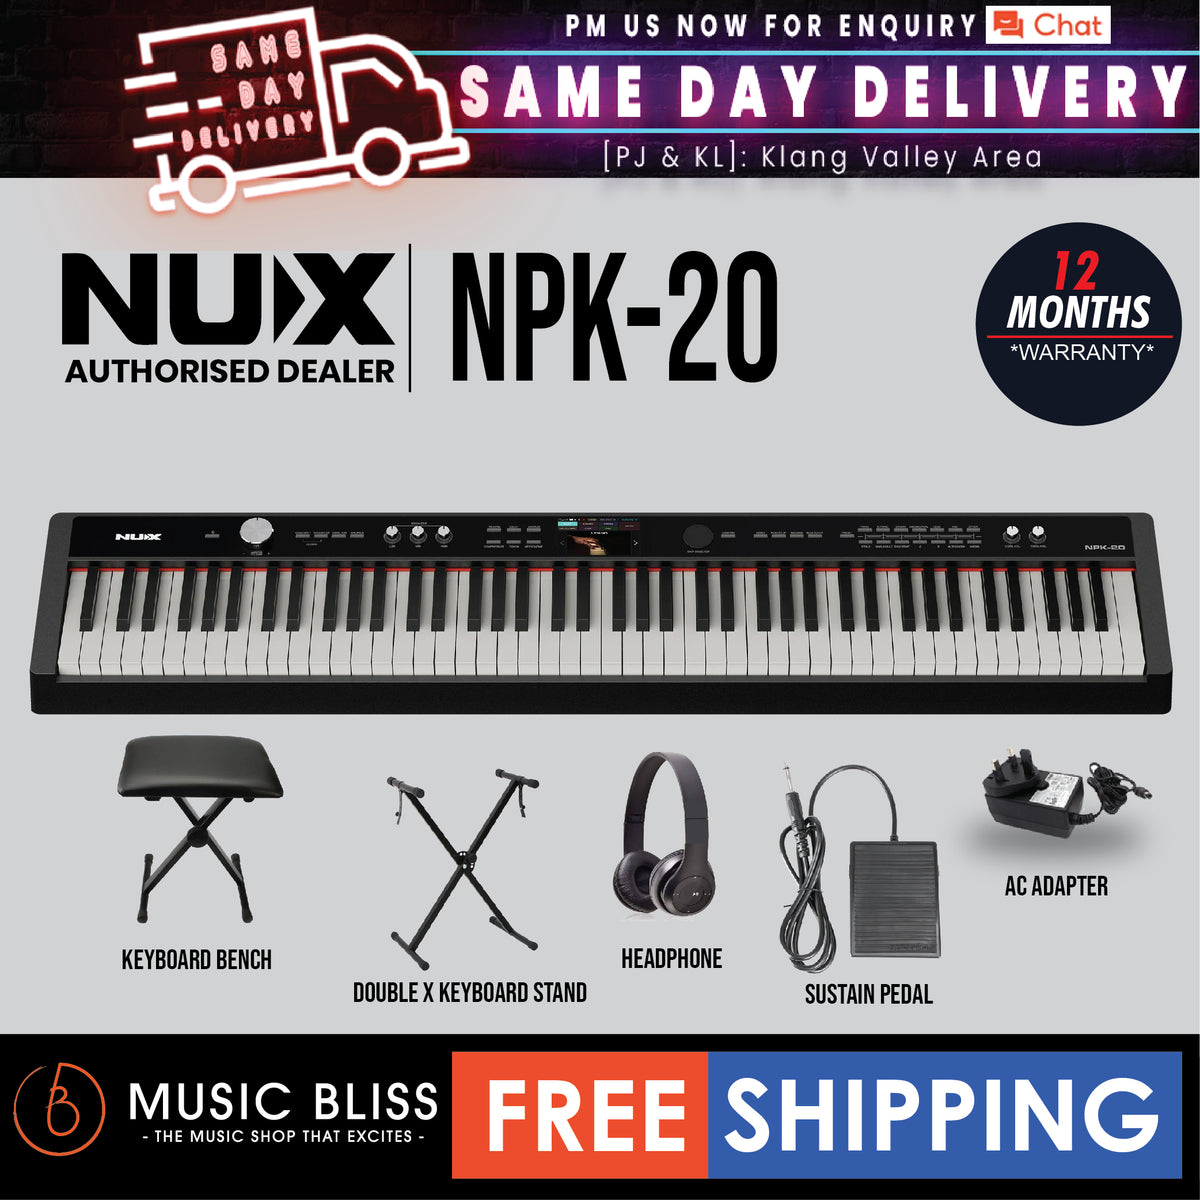 Nux Piano Bench